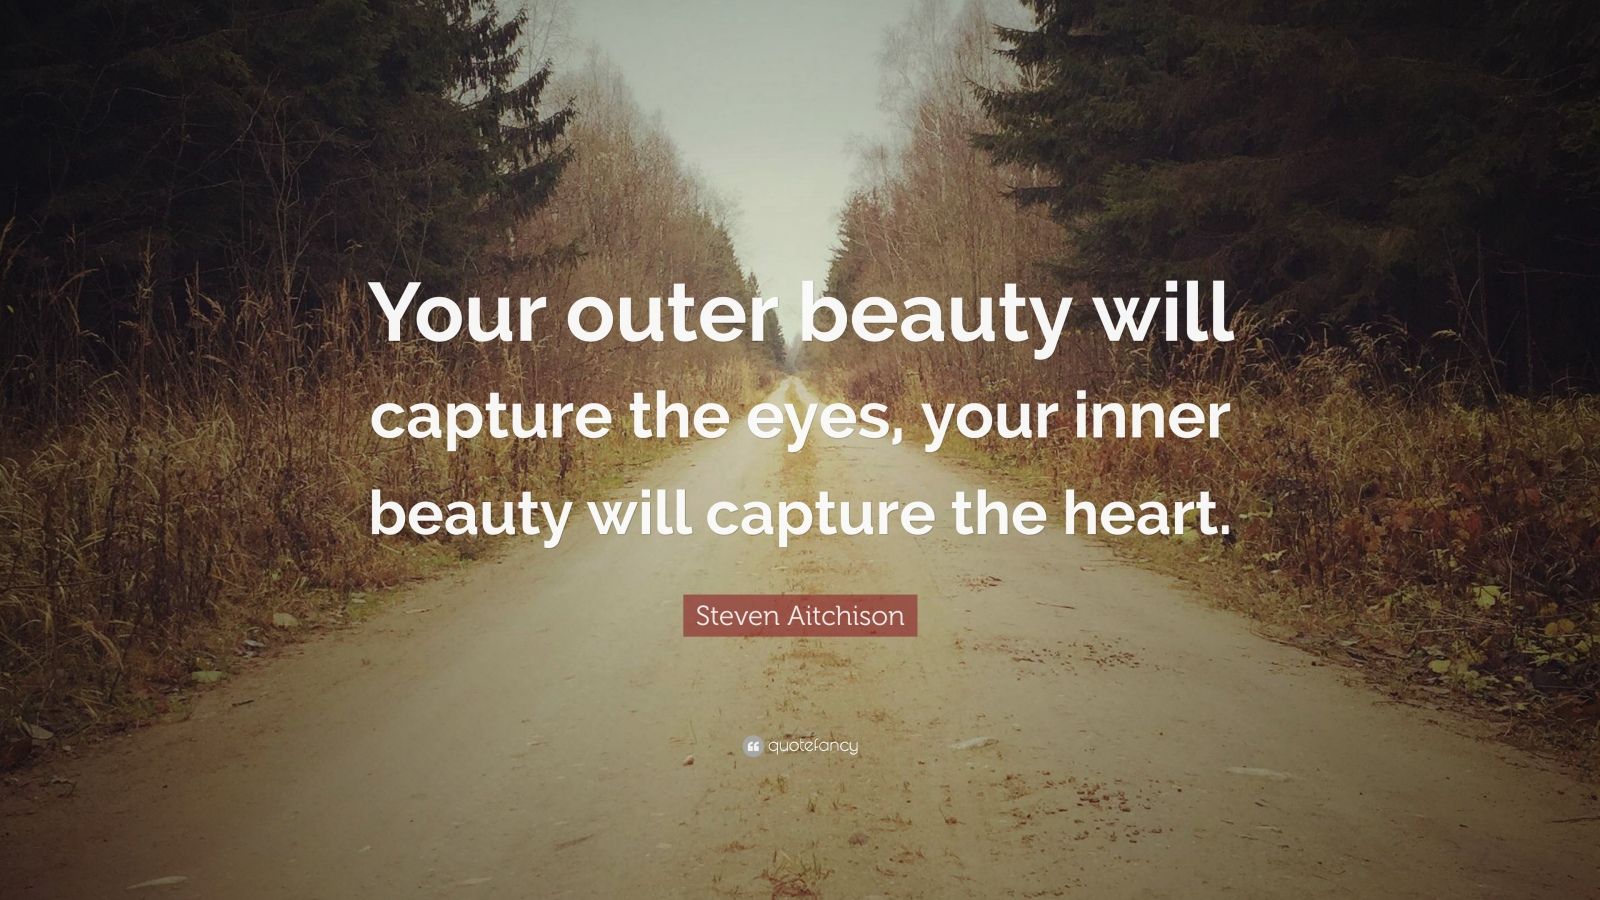 Steven Aitchison Quote: “Your outer beauty will capture the eyes, your